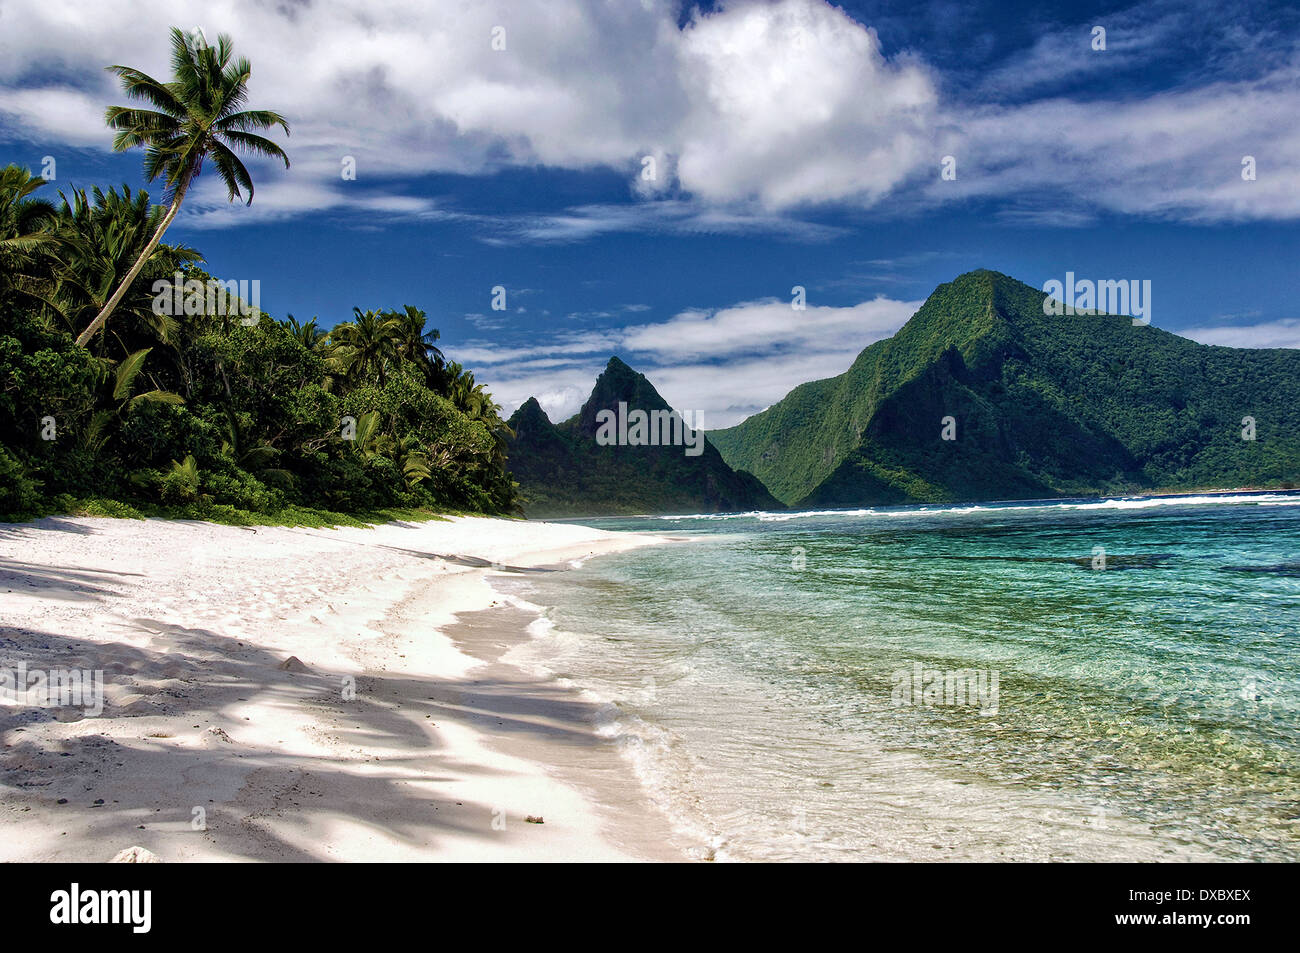 A secluded tropical sand beach and fringing reef in the Samoa National Park in Ofu Island, American Samoa. The island of Olosega rises in the distance. Stock Photo